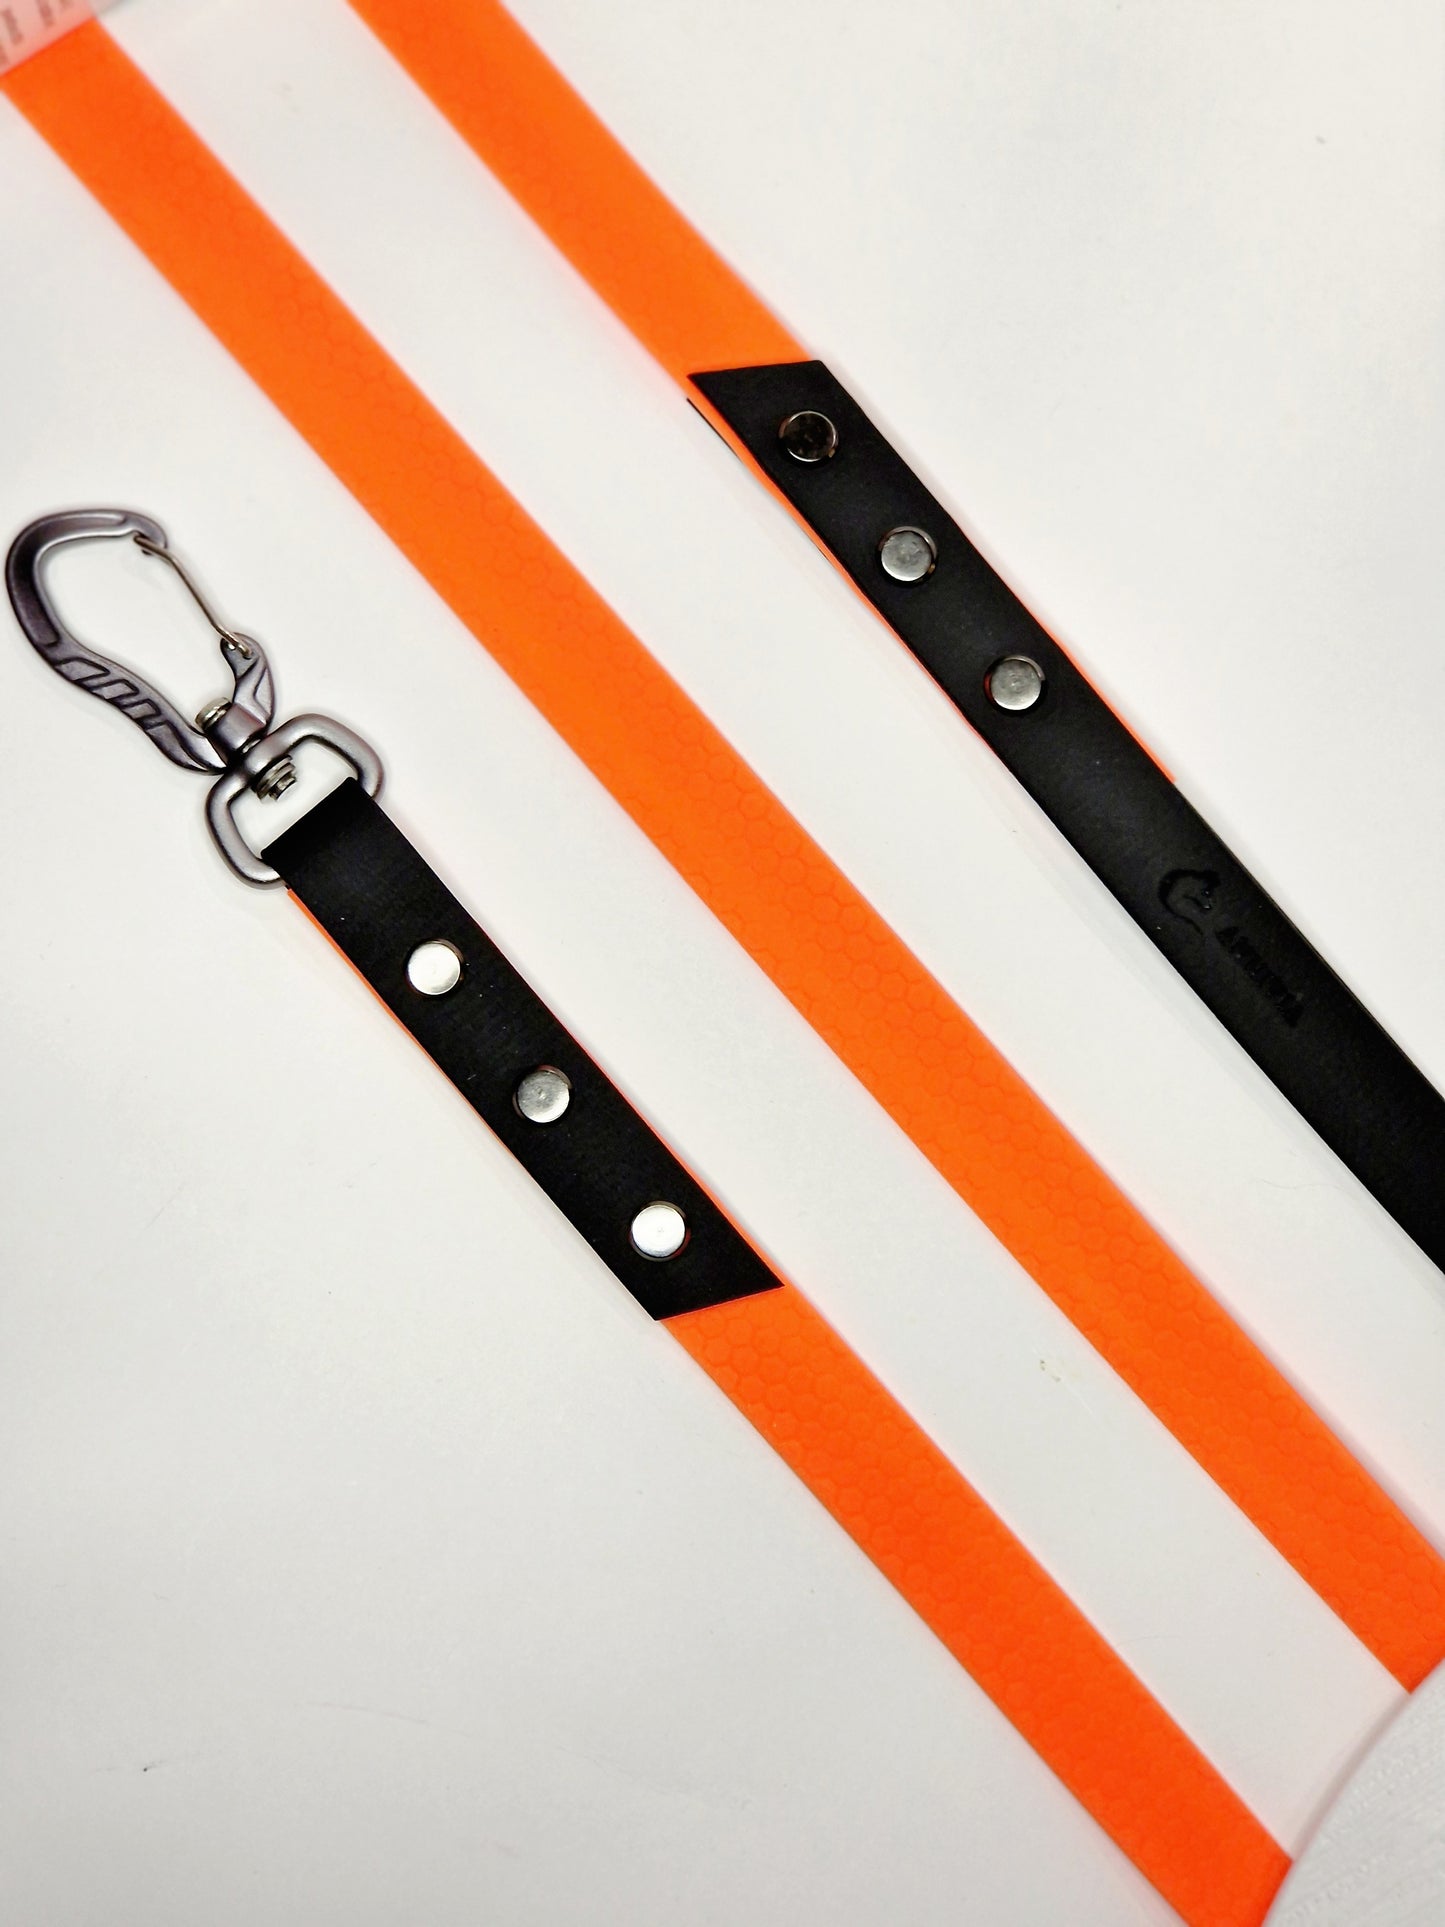 Hexa with Biothane dog leash  - Color choice - Make your own